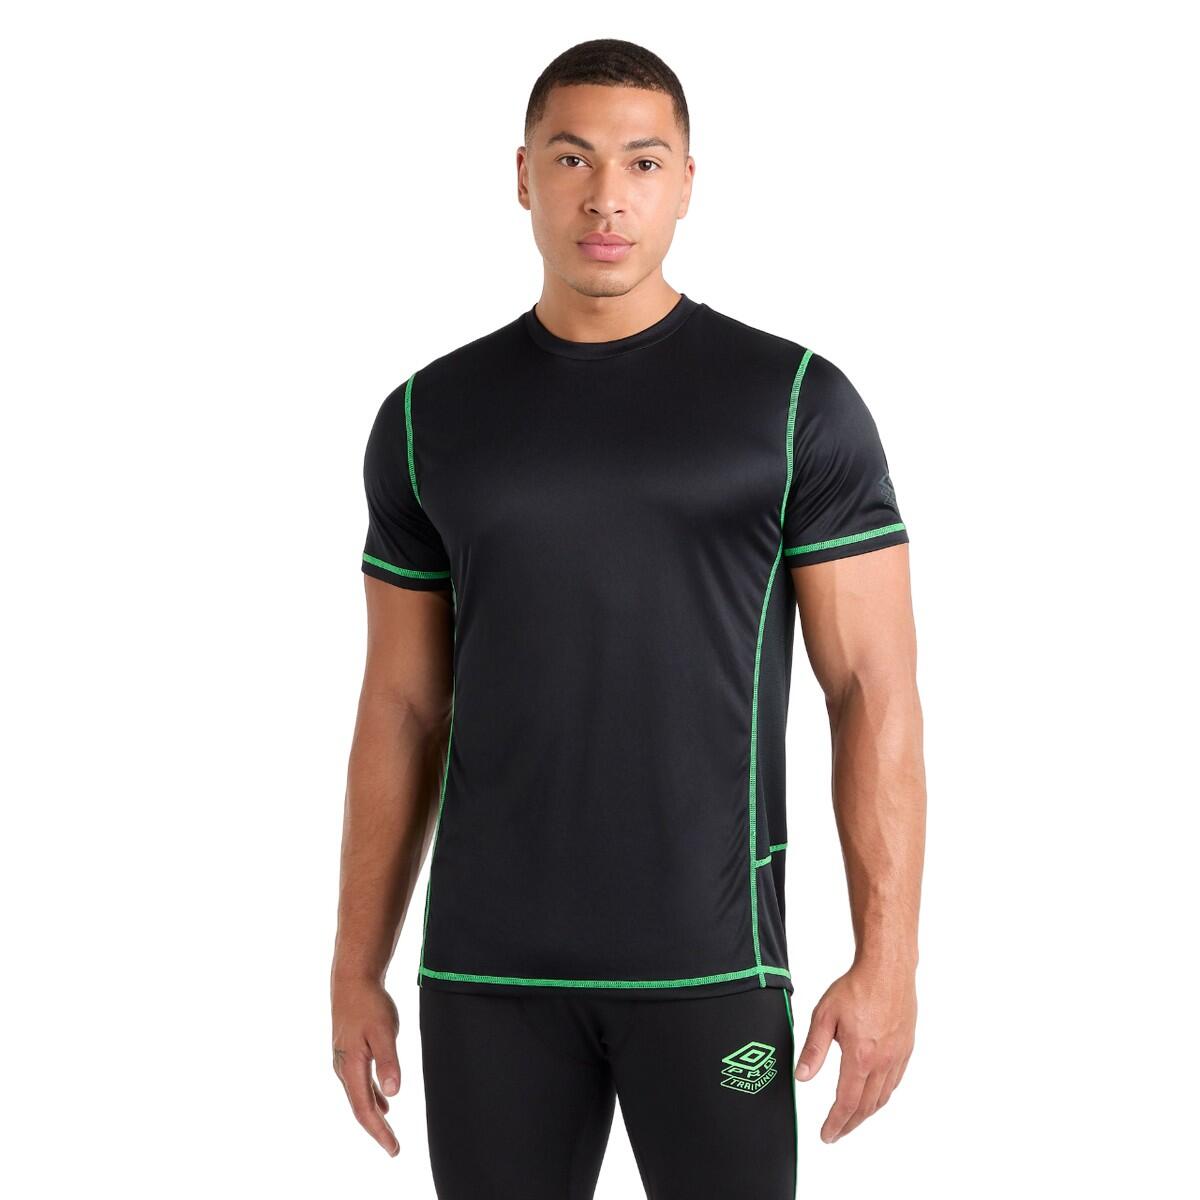 Mens Pro Polyester Training TShirt (Black/Andean Toucan) 3/4